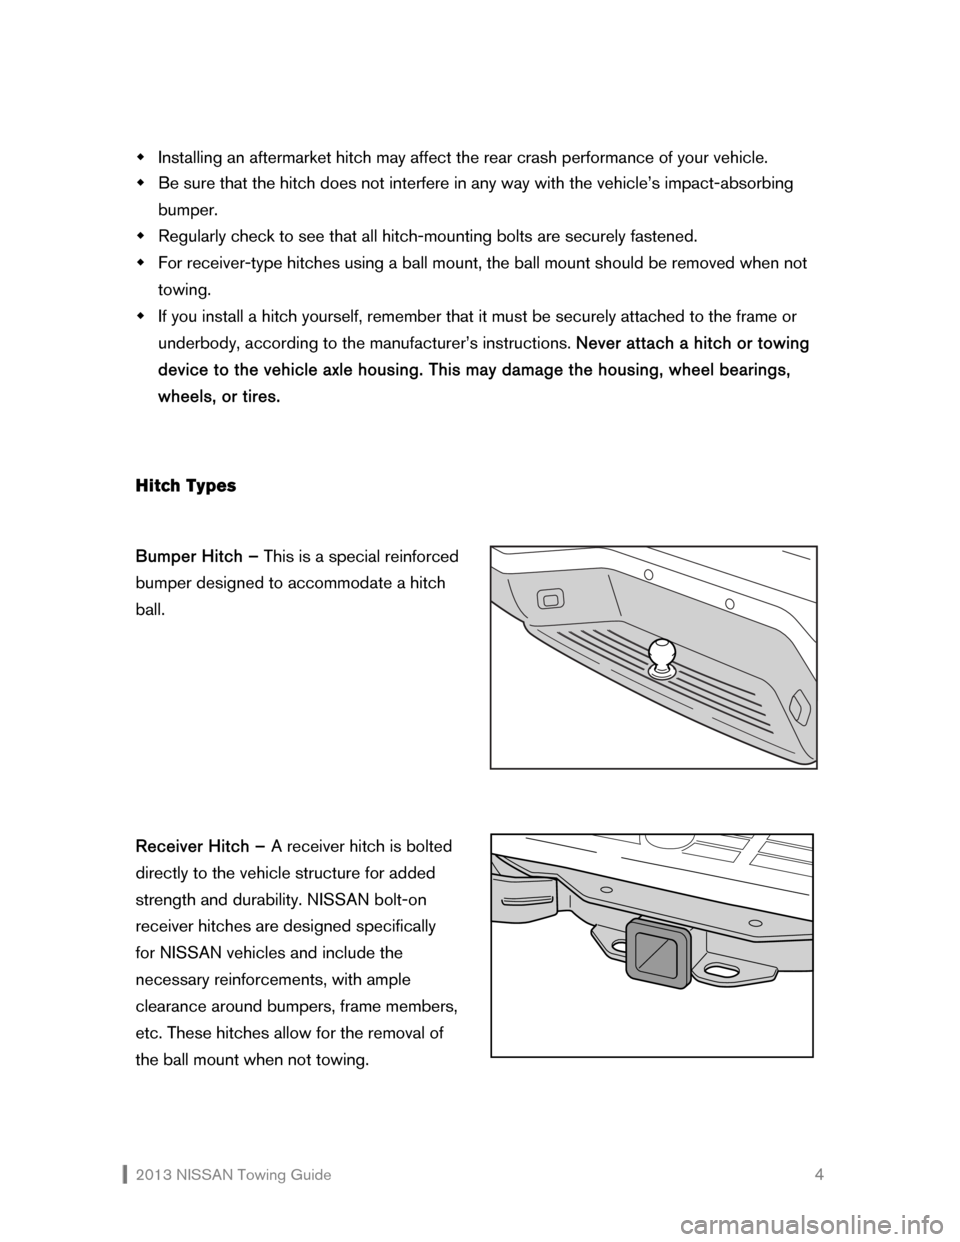 NISSAN MURANO 2013 2.G Towing Guide  2013 NISSAN Towing Guide    4 �Š Installing an aftermarket hitch may affect the rear crash performance of your vehicle. 
�Š Be sure that the hitch does not interfere in any way with the vehicle’s